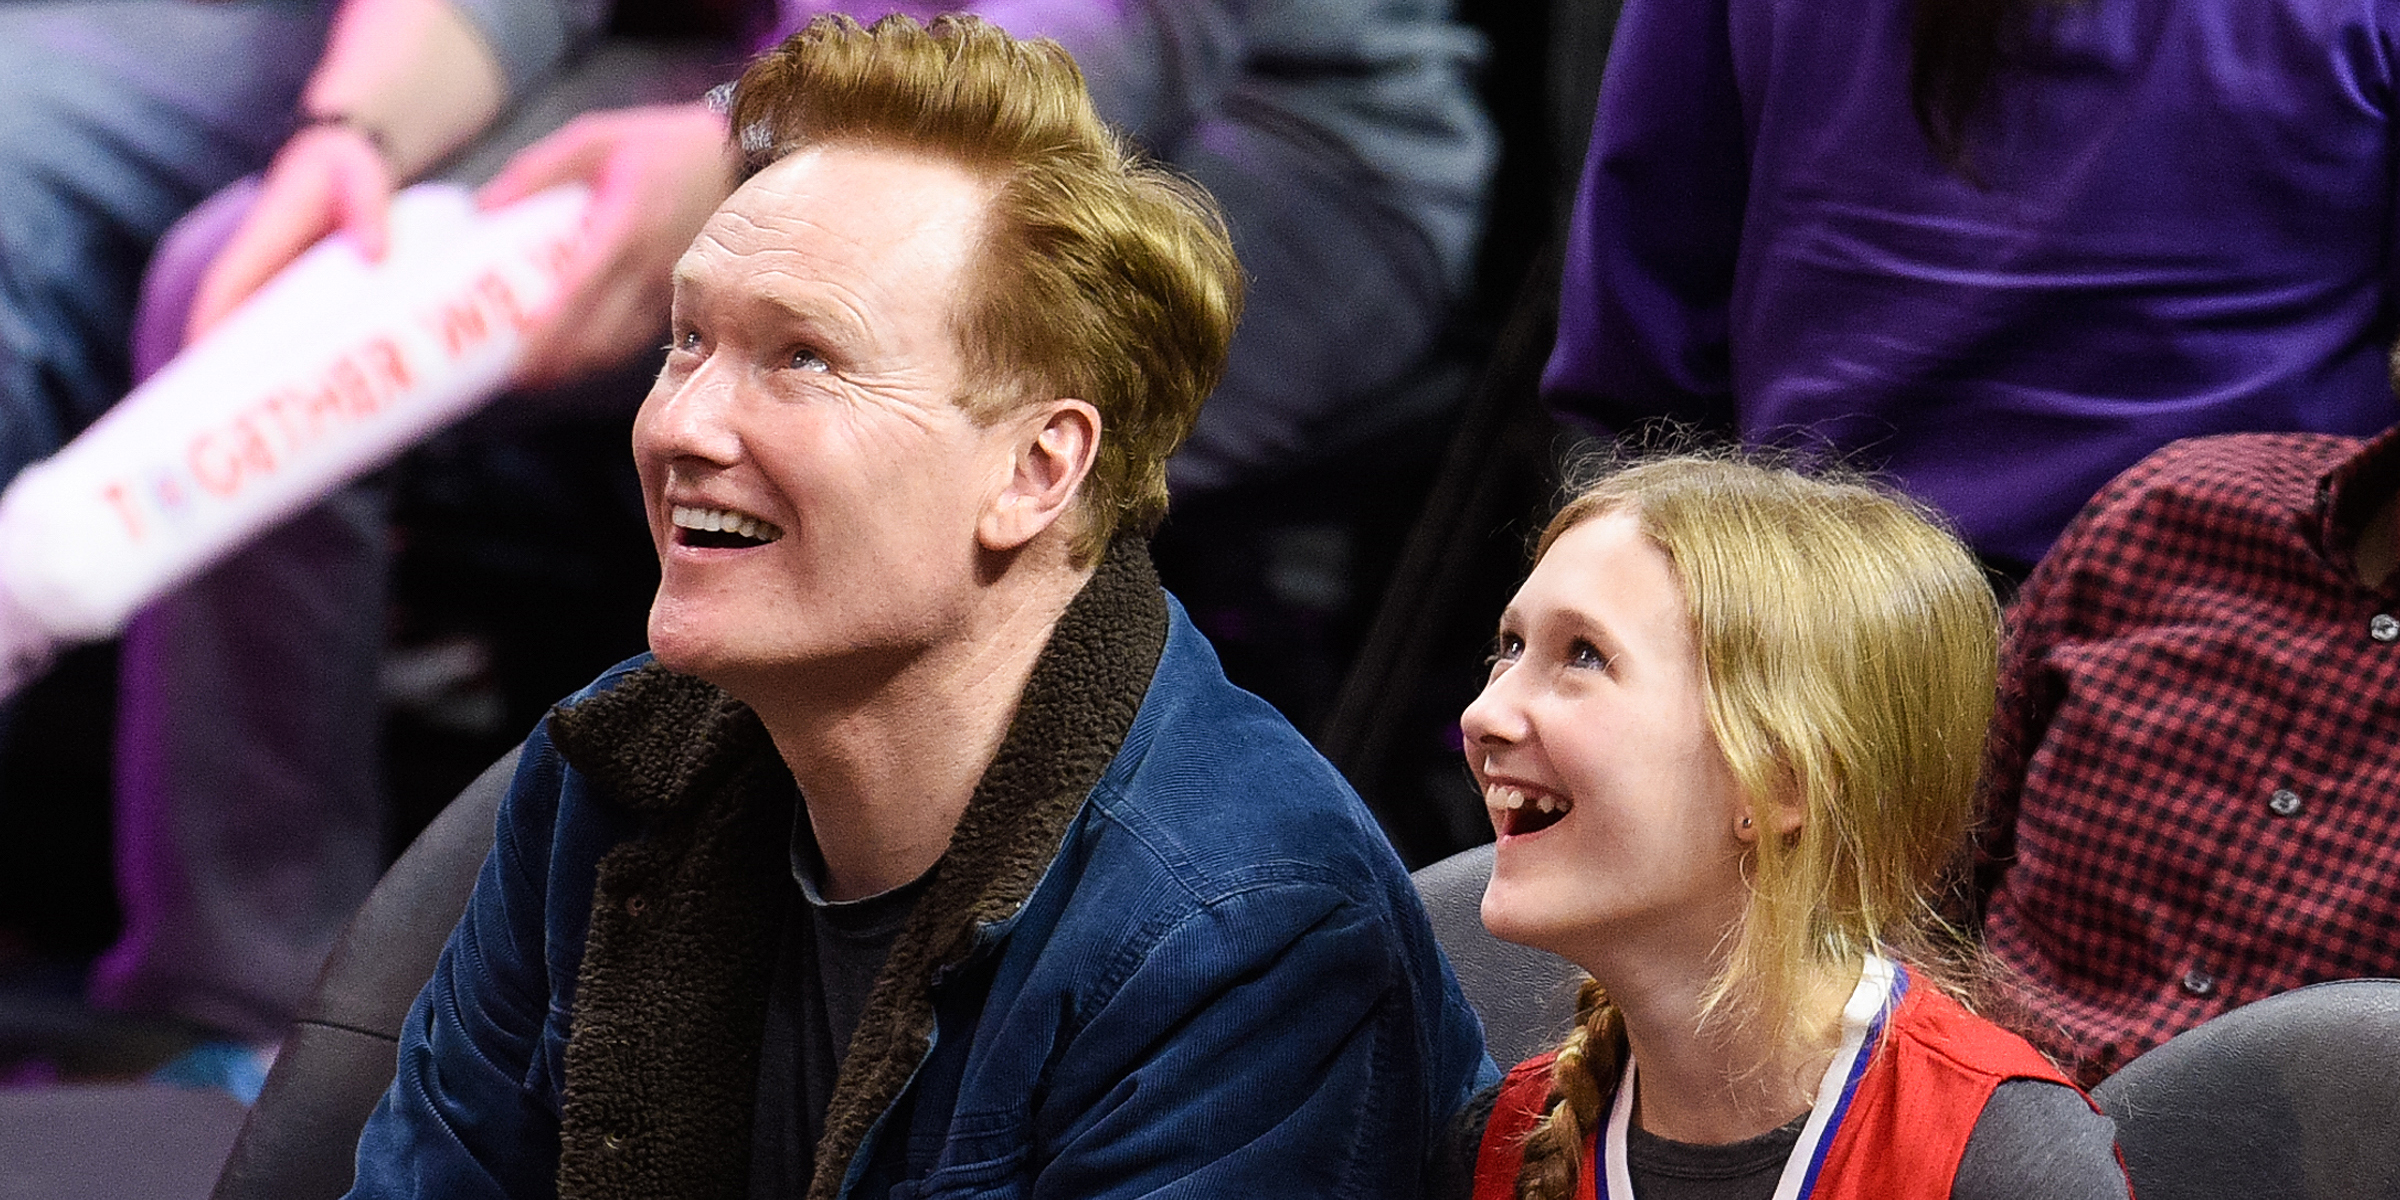 Conan O'Brien and Neve O'Brien | Source: Getty Images